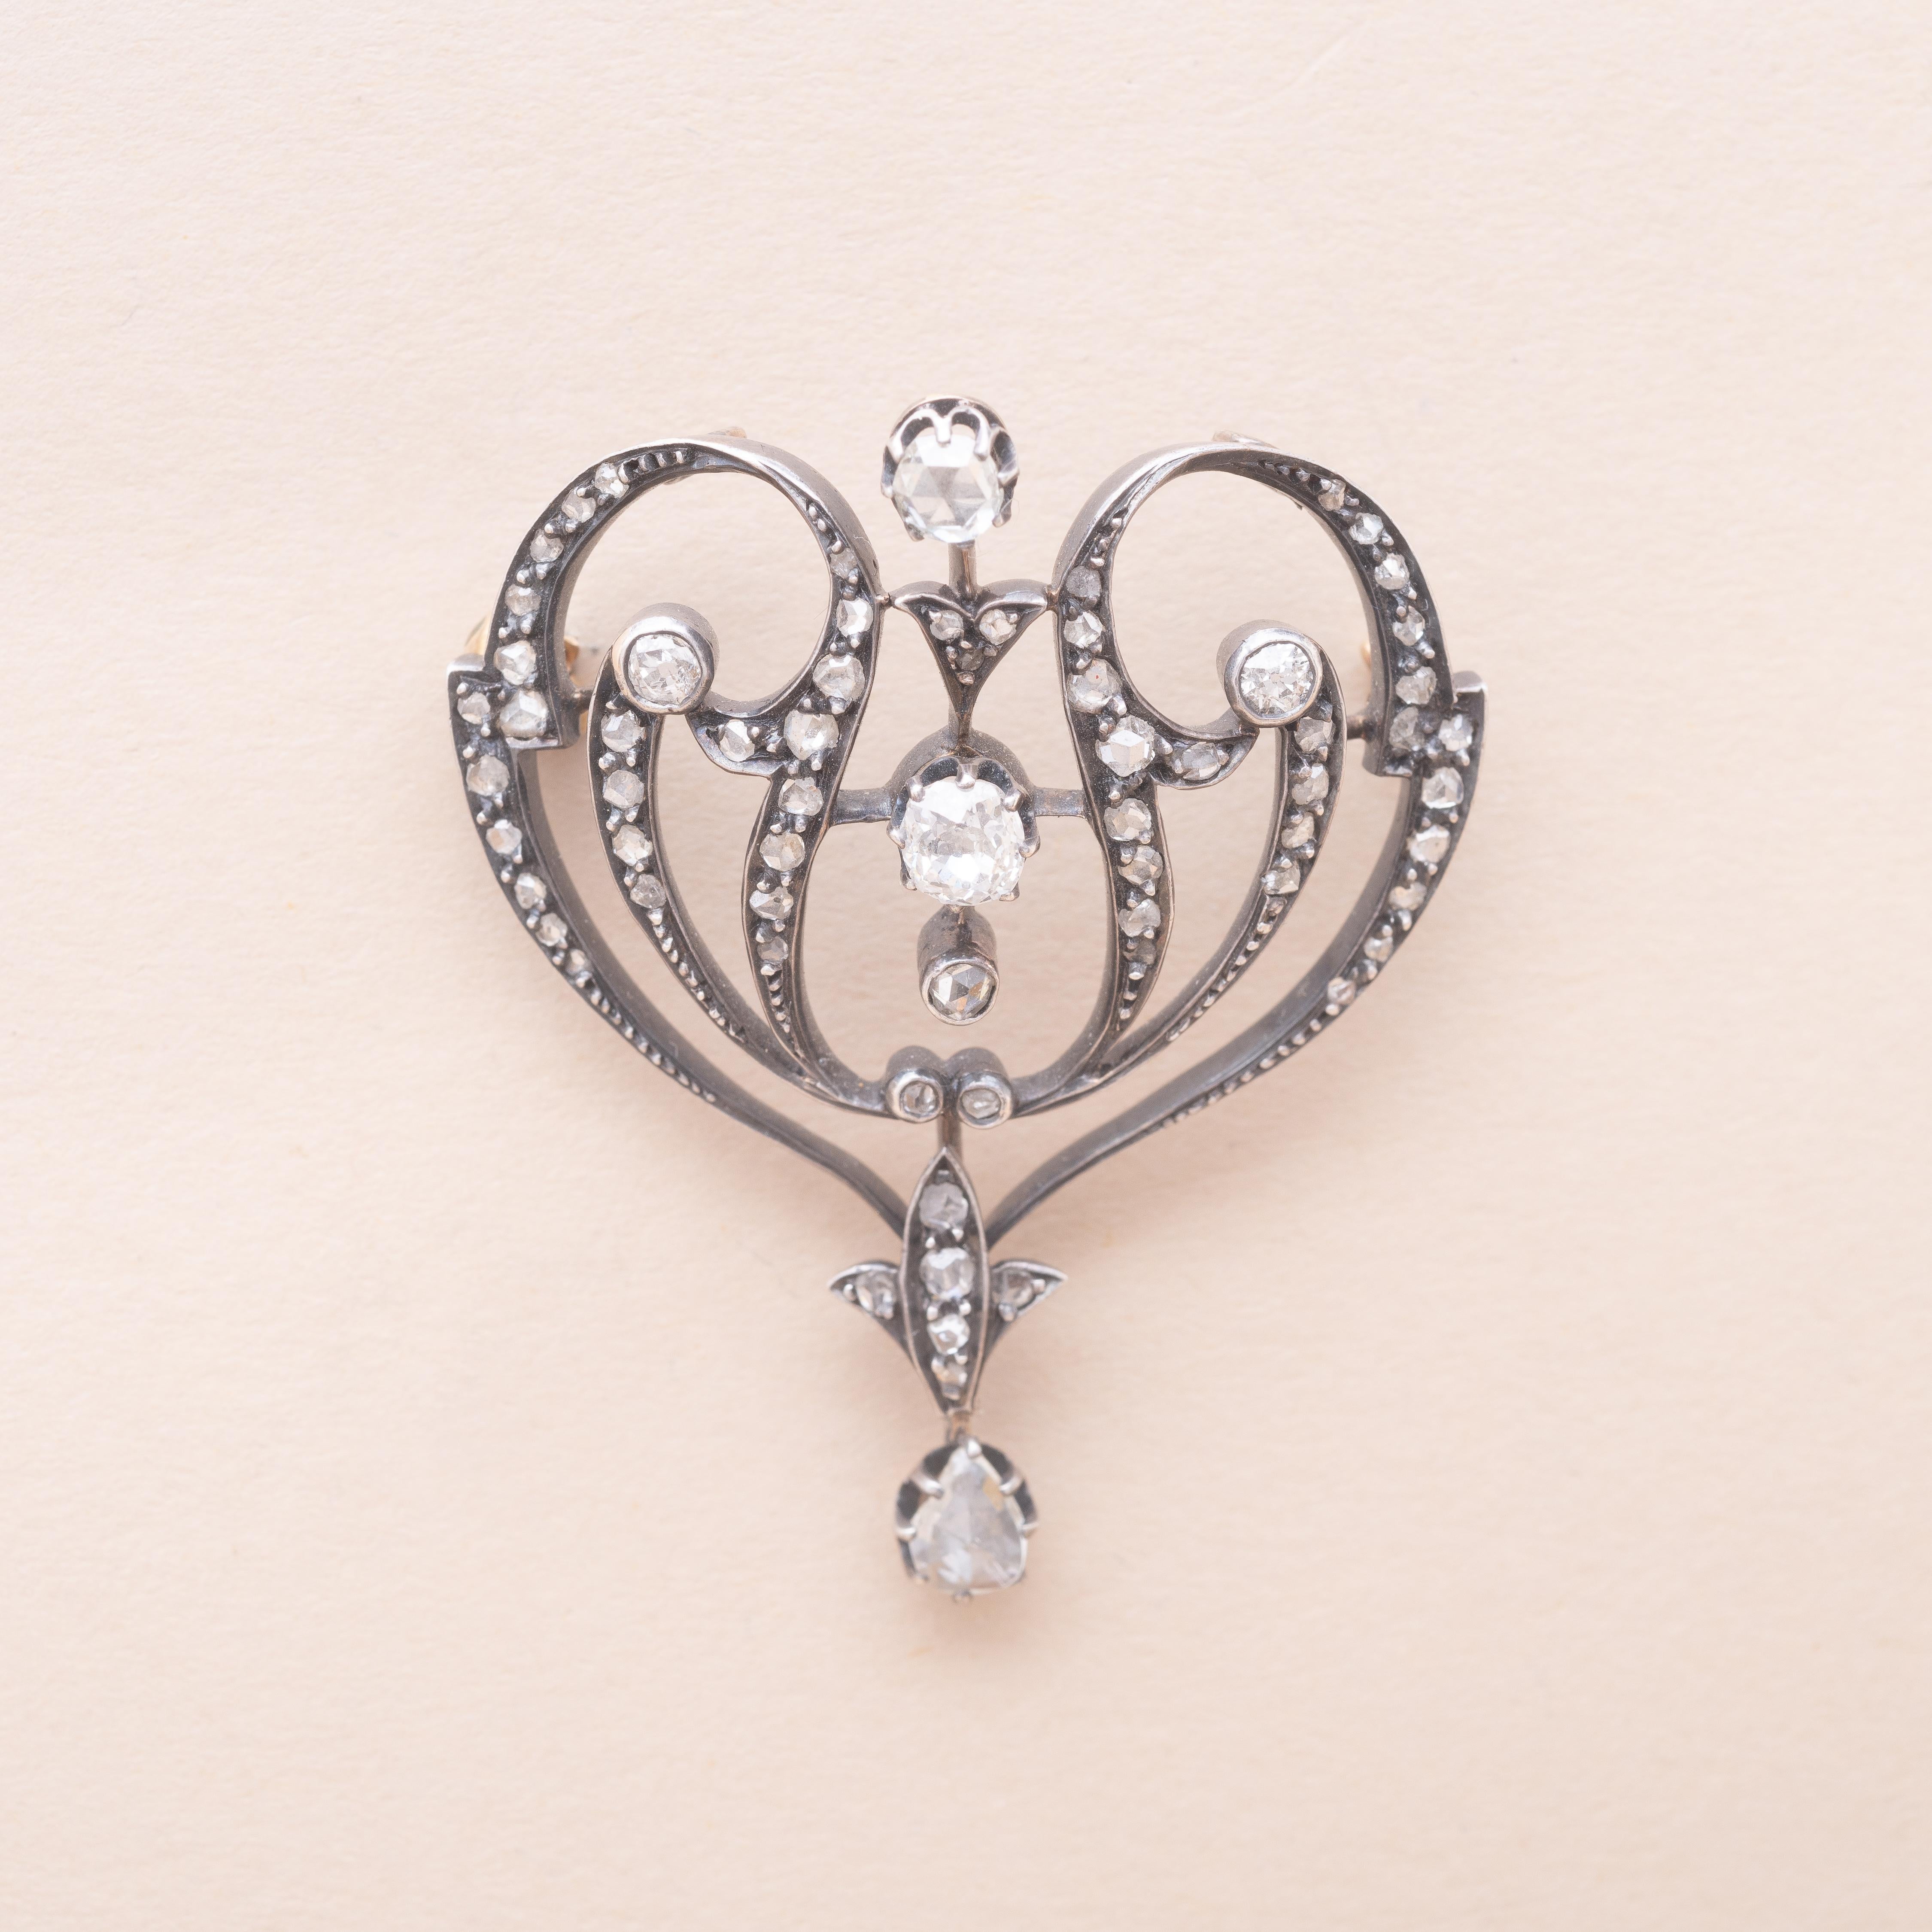 Volute Art Nouveau silver and 18K gold pendant brooch. Old-cut and rose-cut diamonds. Small old-cut diamond tassel. 

1900s Art Nouveau
Total estimated diamond weight : 0.50 carat 
Two hoops on the back allow to wear it as a pendant
Dimensions : 43